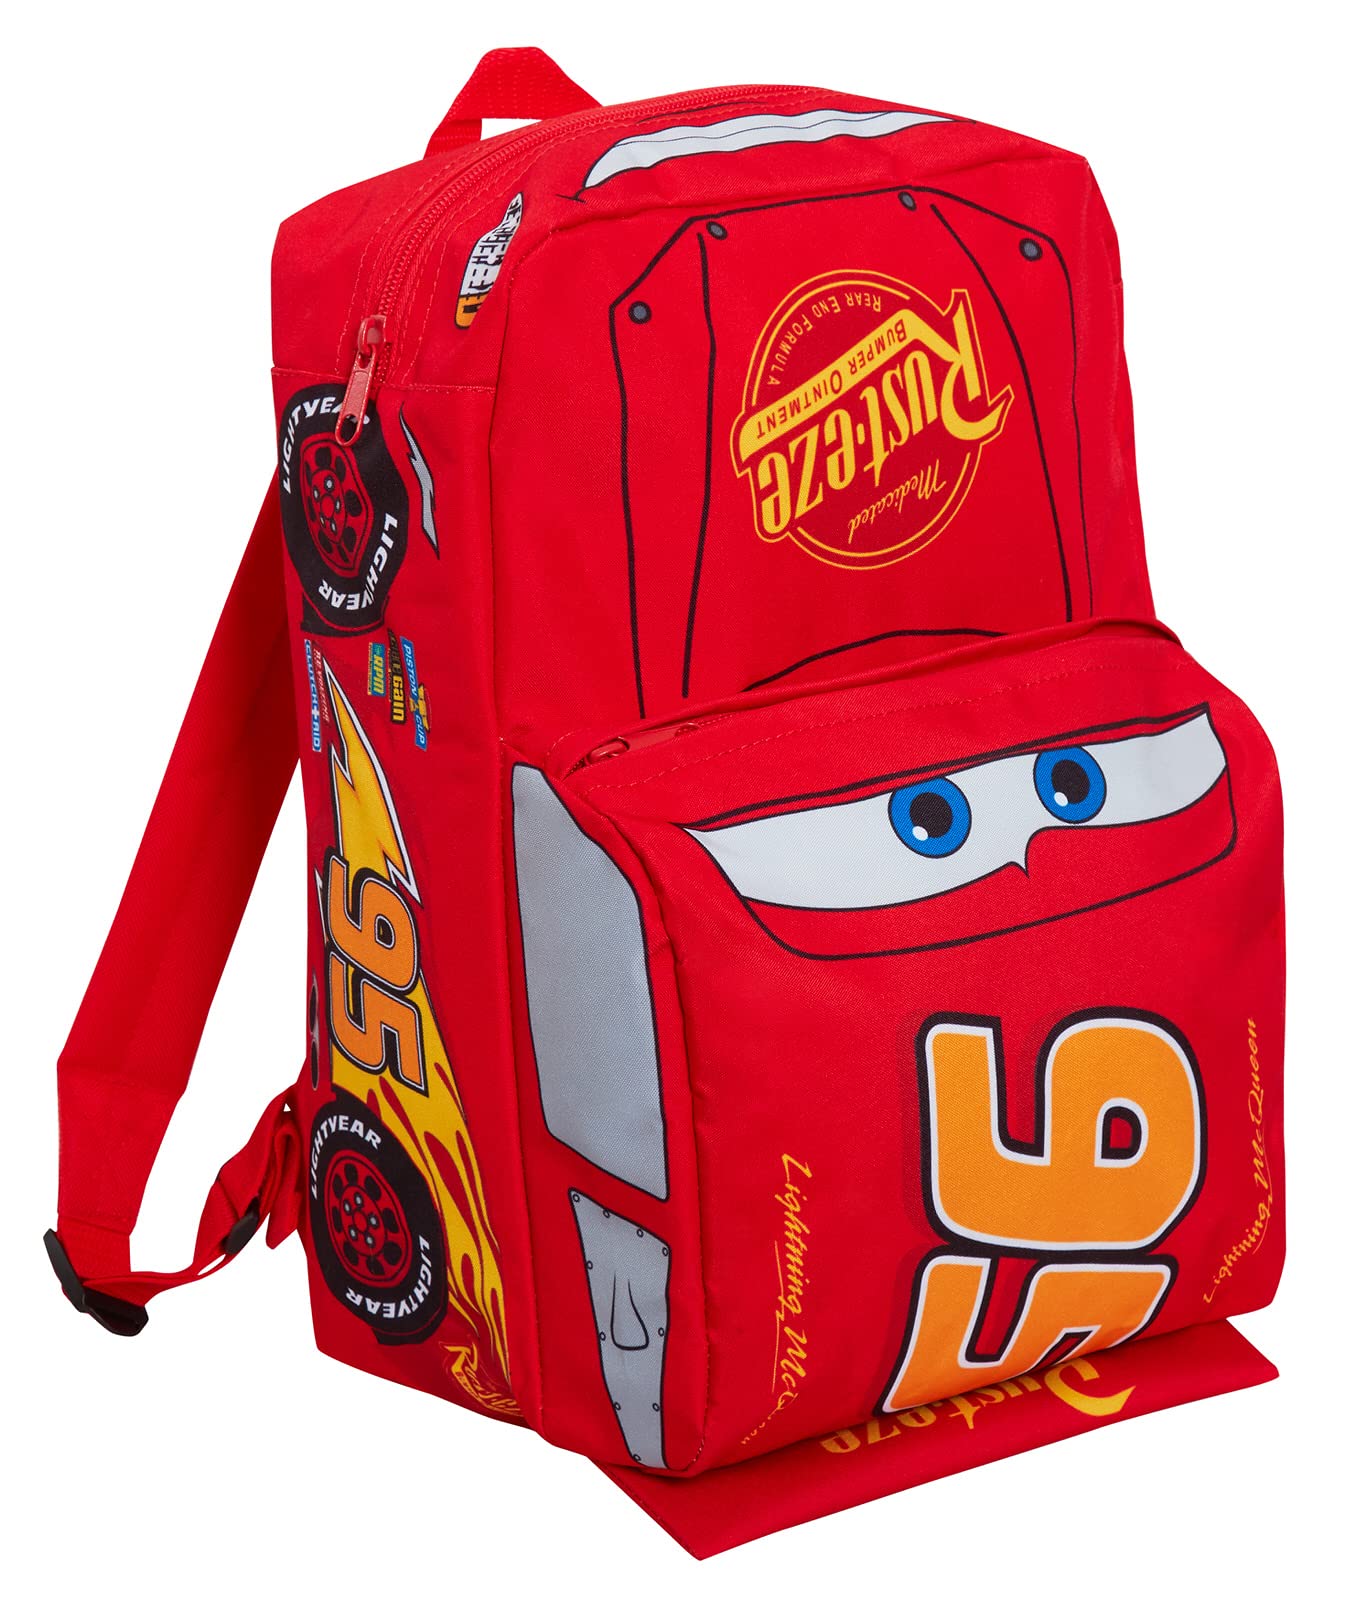 Disney Kids Cars Backpack Official Lightning McQueen 'Piston Cup Champion' 3D Effect Car Children's School Nursery Lunch Bag Large Rucksack Red 95 Carry On